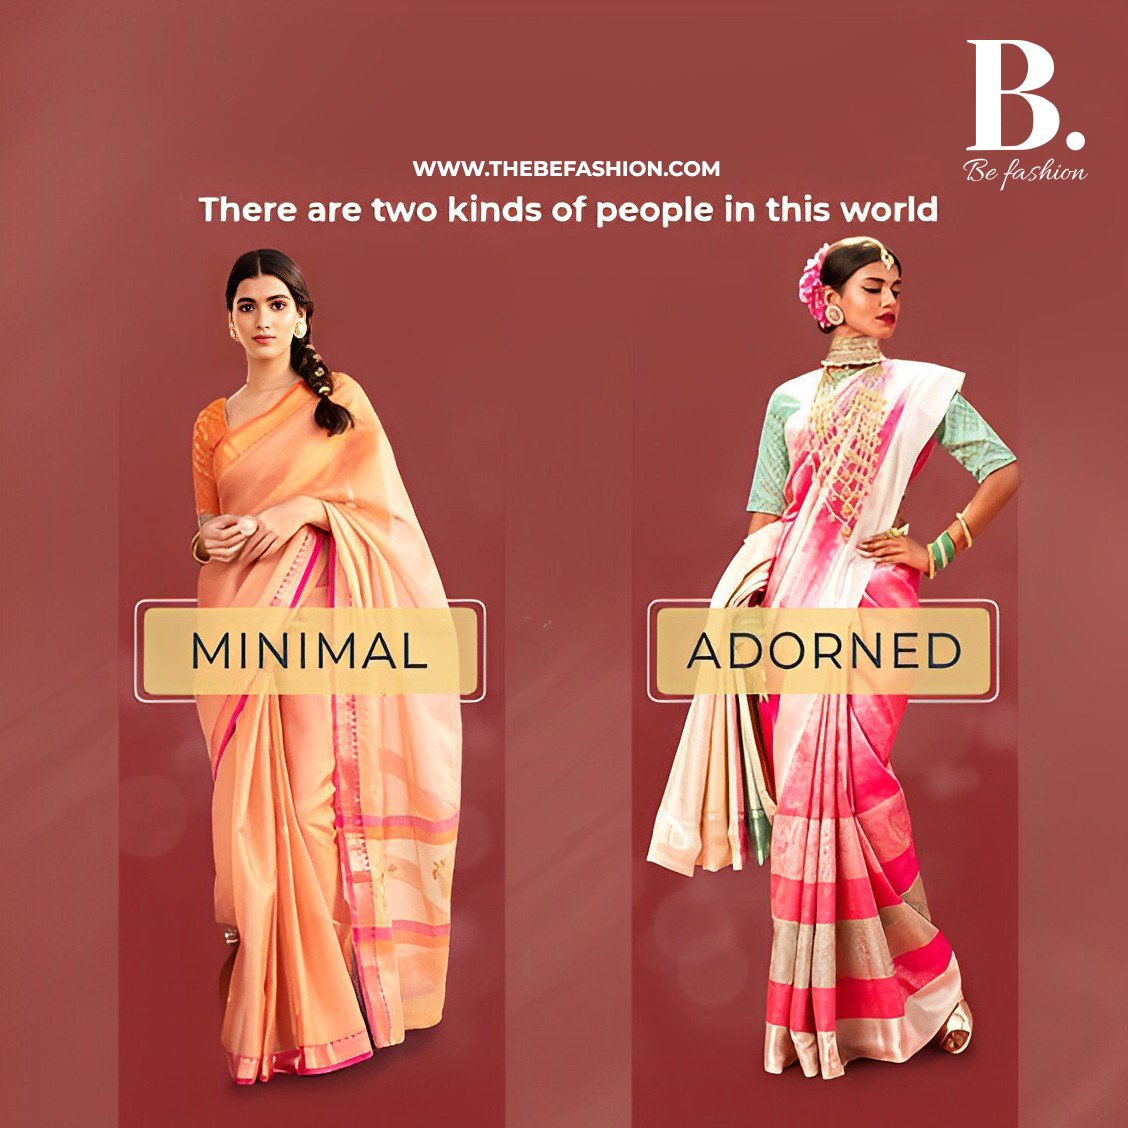 Elegance Unveiled: Where Simplicity Meets Splendor. Explore Our Collection of Graceful Indian Ethic Sarees. Embrace Tradition with a Touch of Glamour. 🌺👘✨

#befashion #womensfashion #womensfashionstyle #womensfashionblog #womensfashions #womensfashionreview